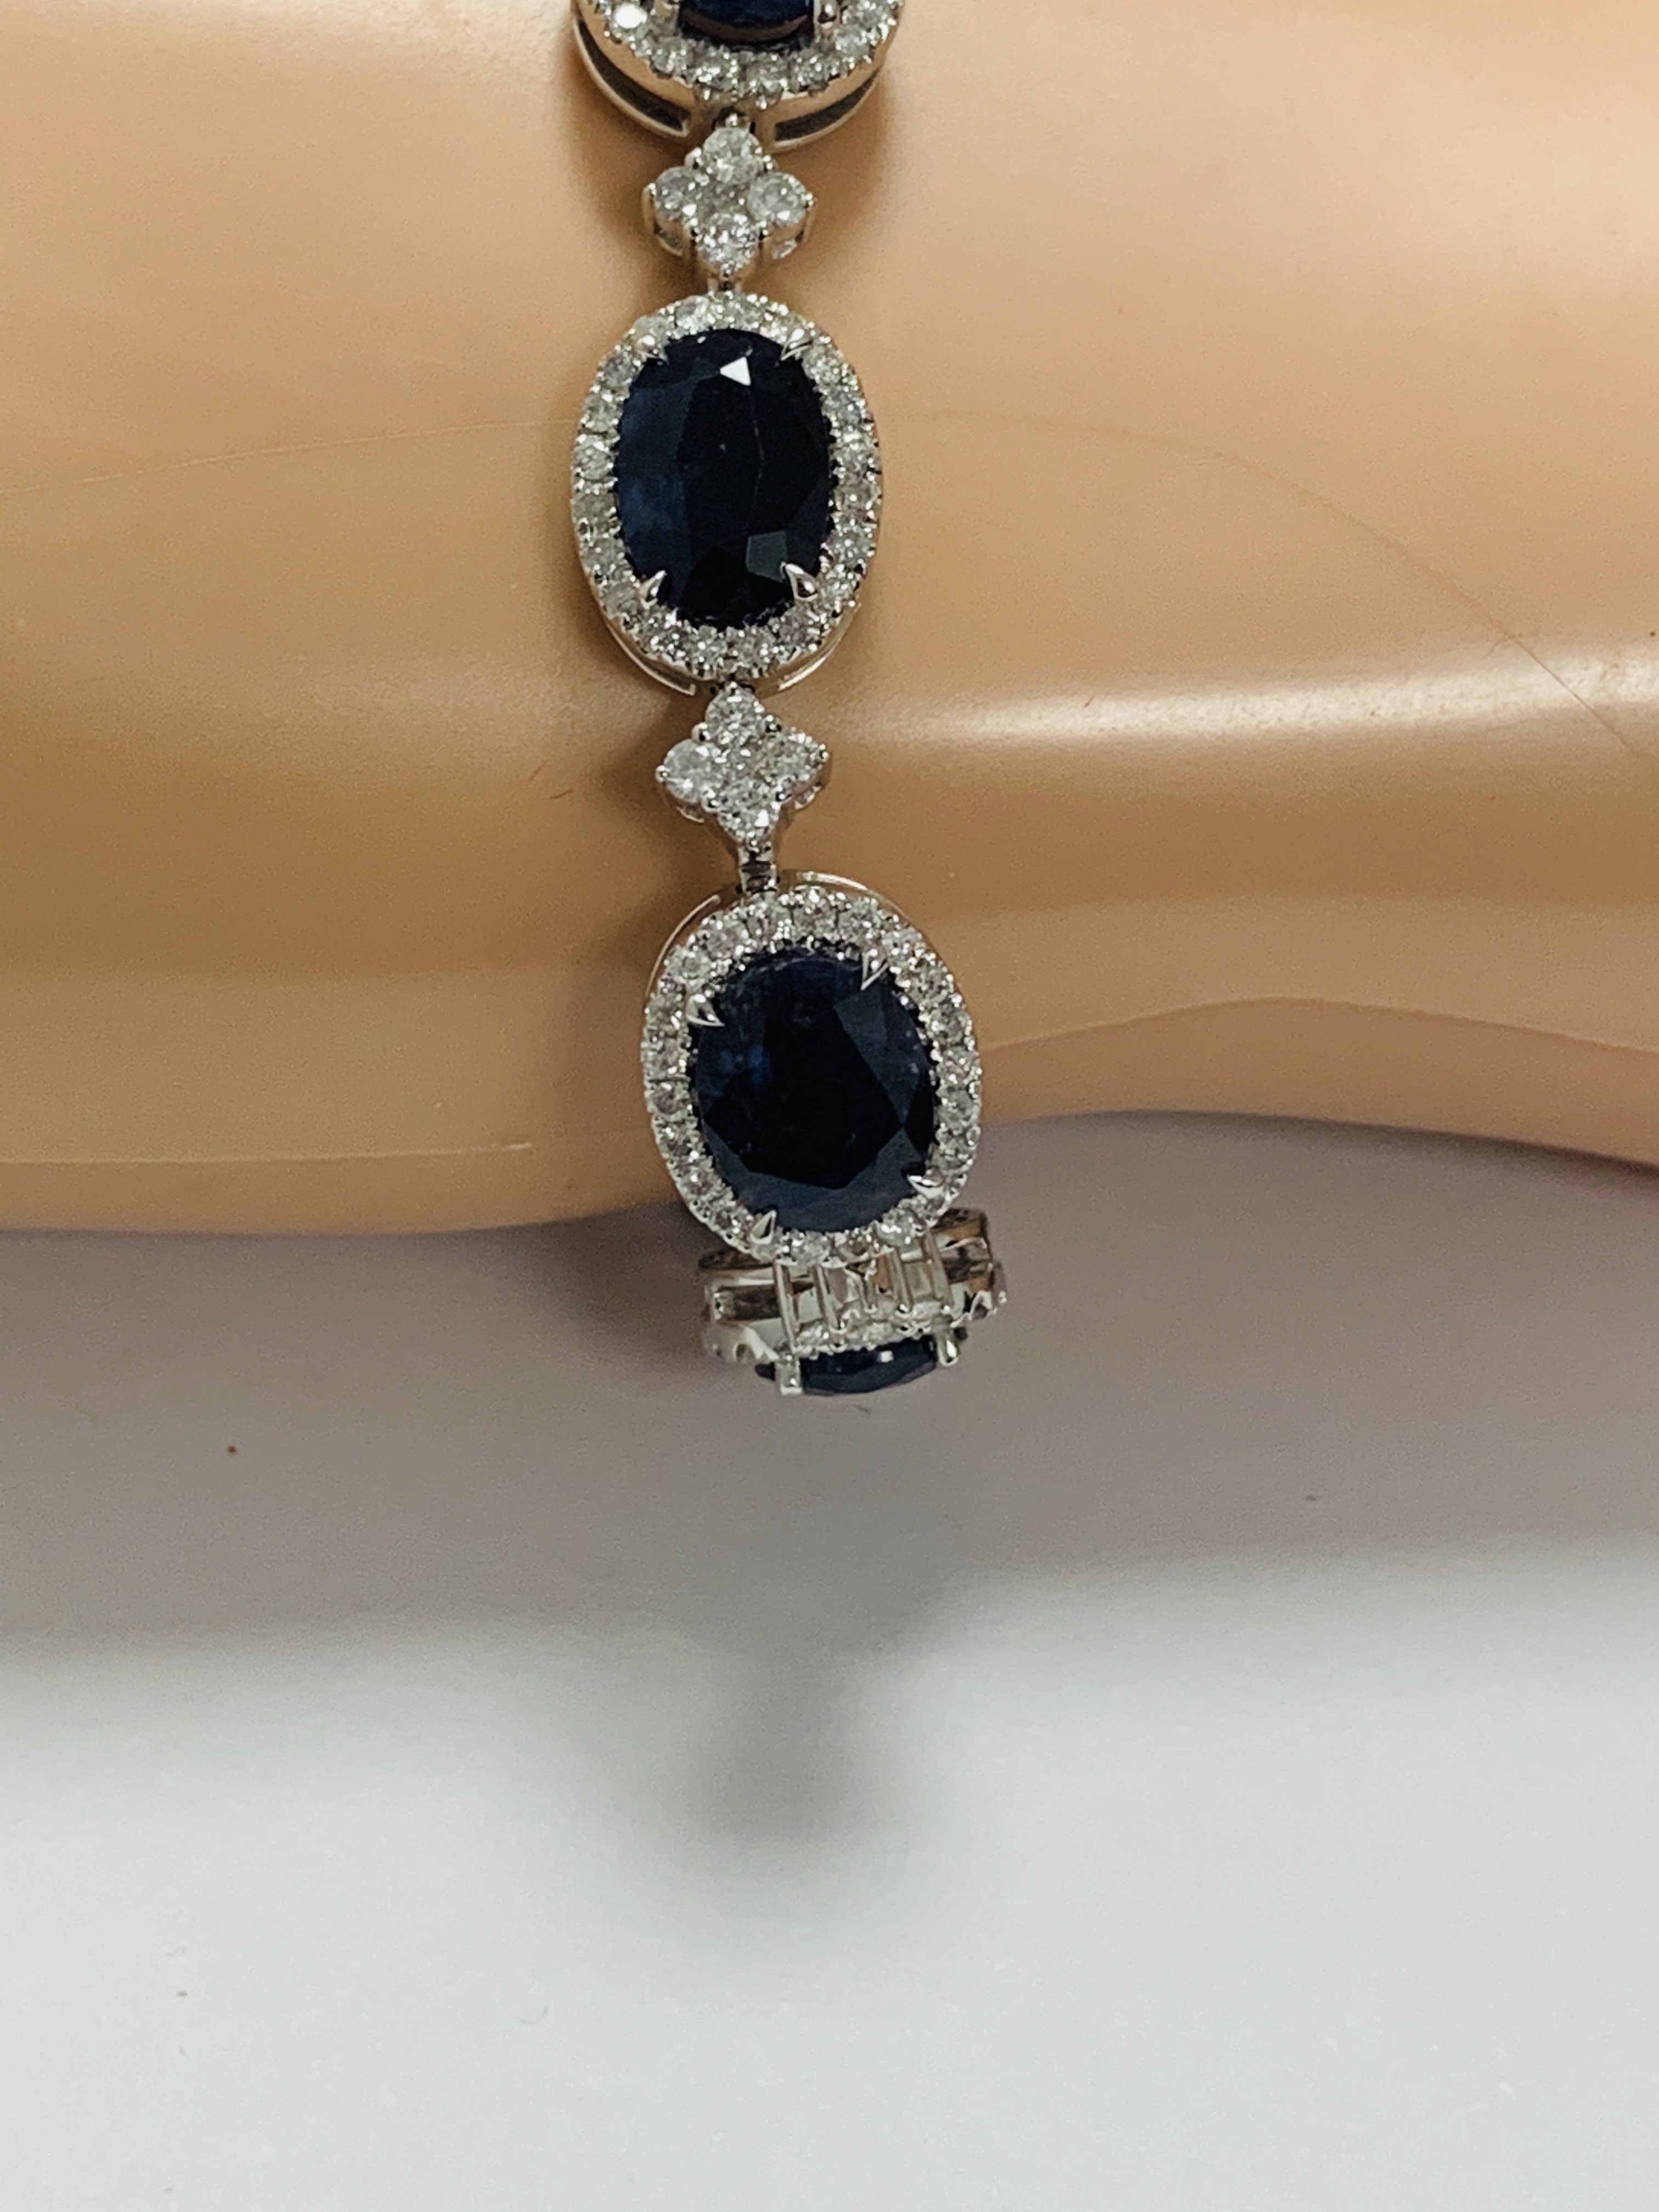 18ct White Gold Sapphire and Diamond bracelet featuring, 10 oval cut, dark blue Kashmir Sapphires (2 - Image 14 of 21